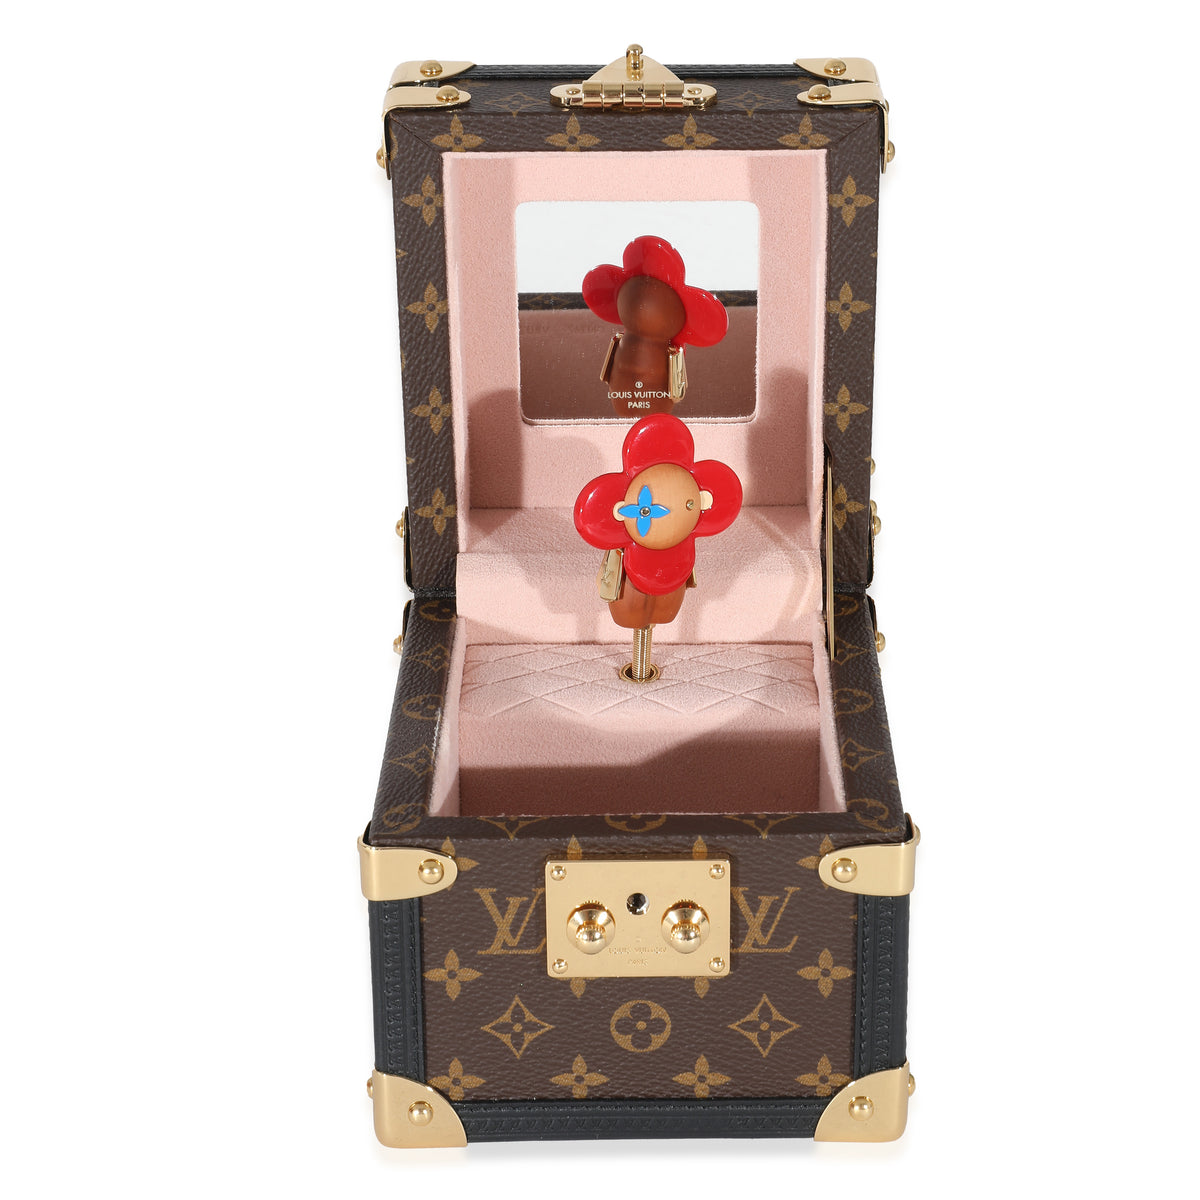 2020 Louis Vuitton Vivienne music/jewelry box in pink - Pinth